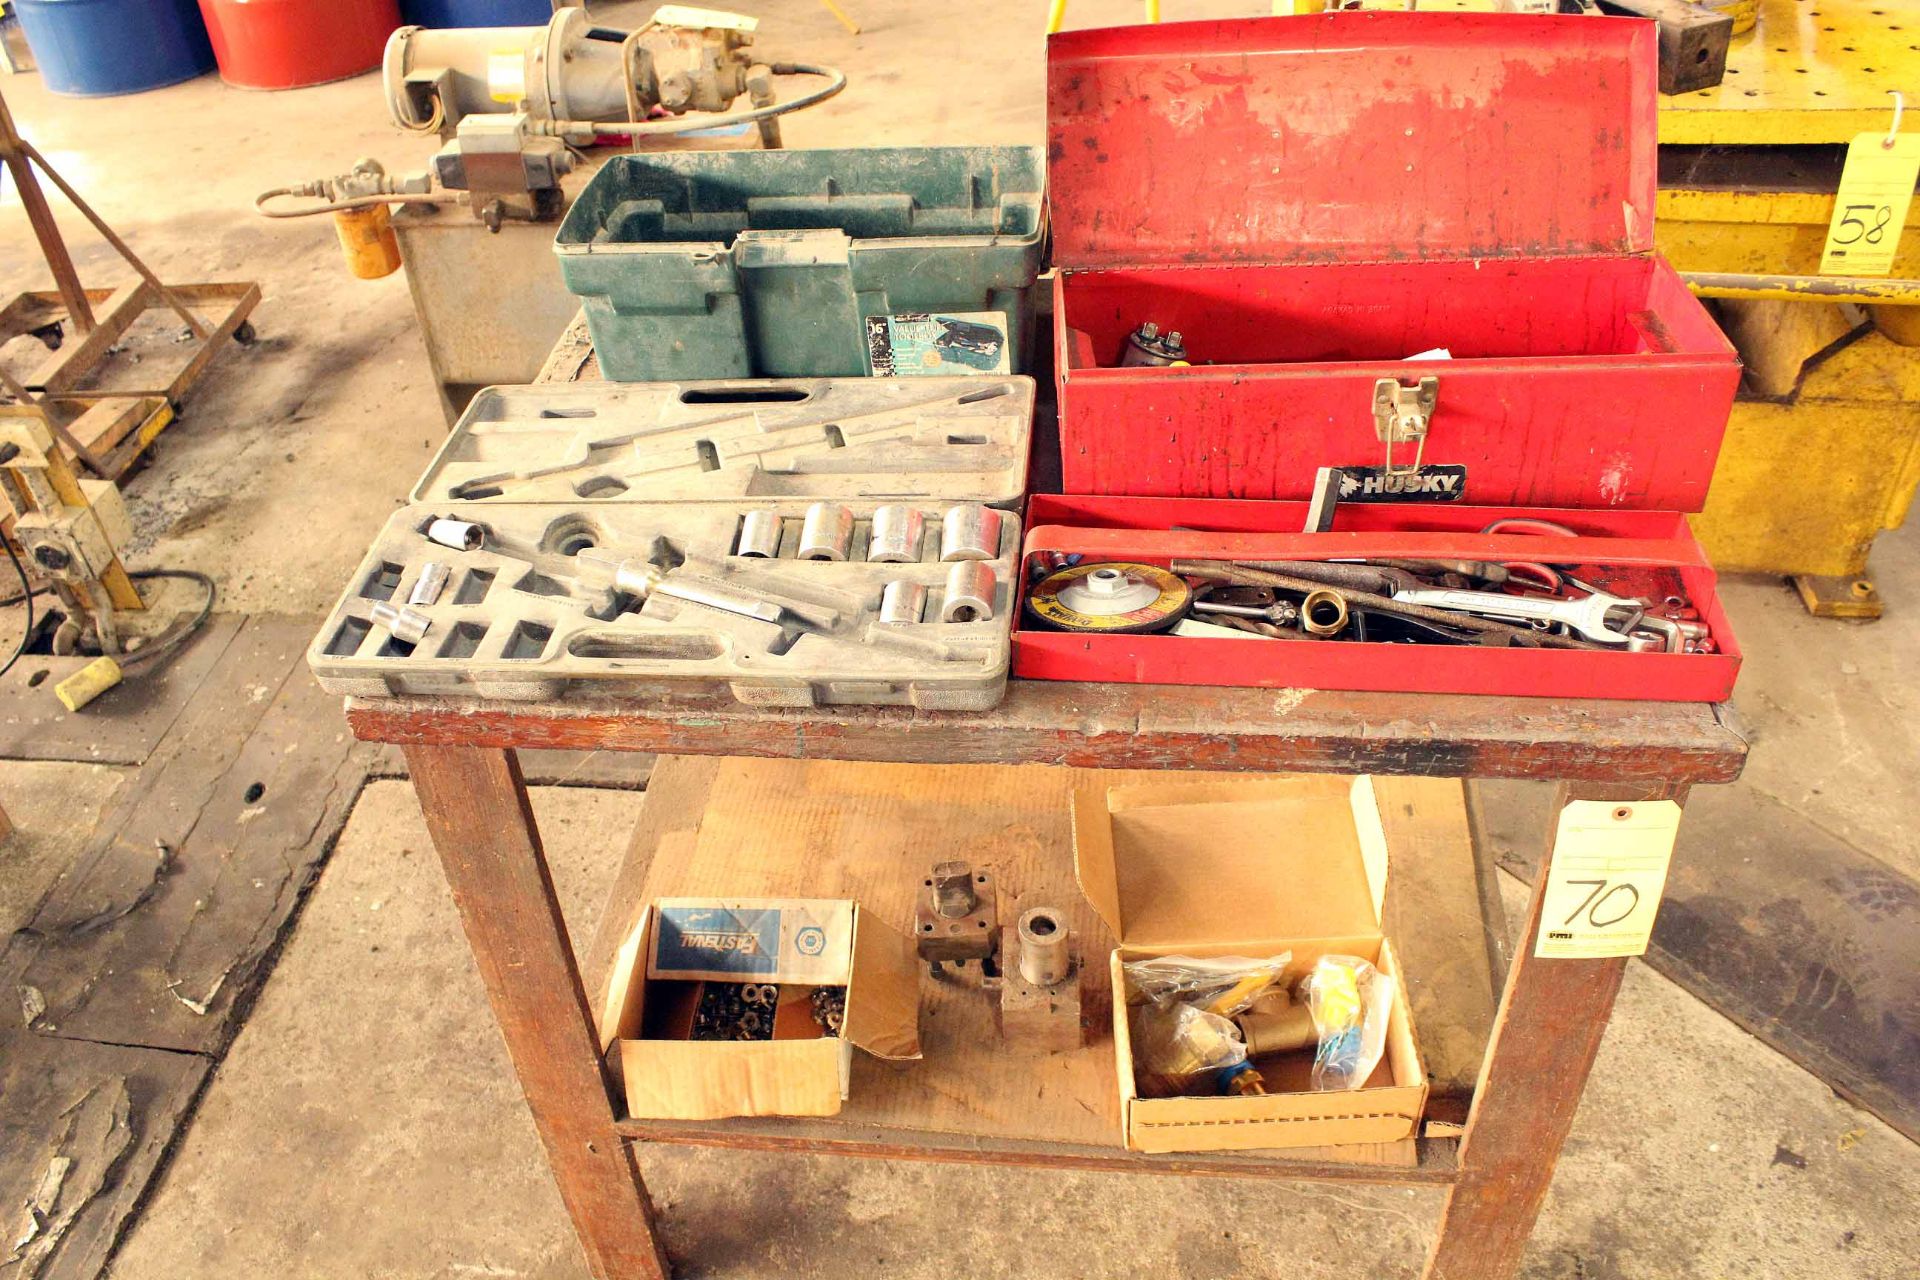 WORKTABLE, wood fabricated, w/cutter heads, hand tools, etc.